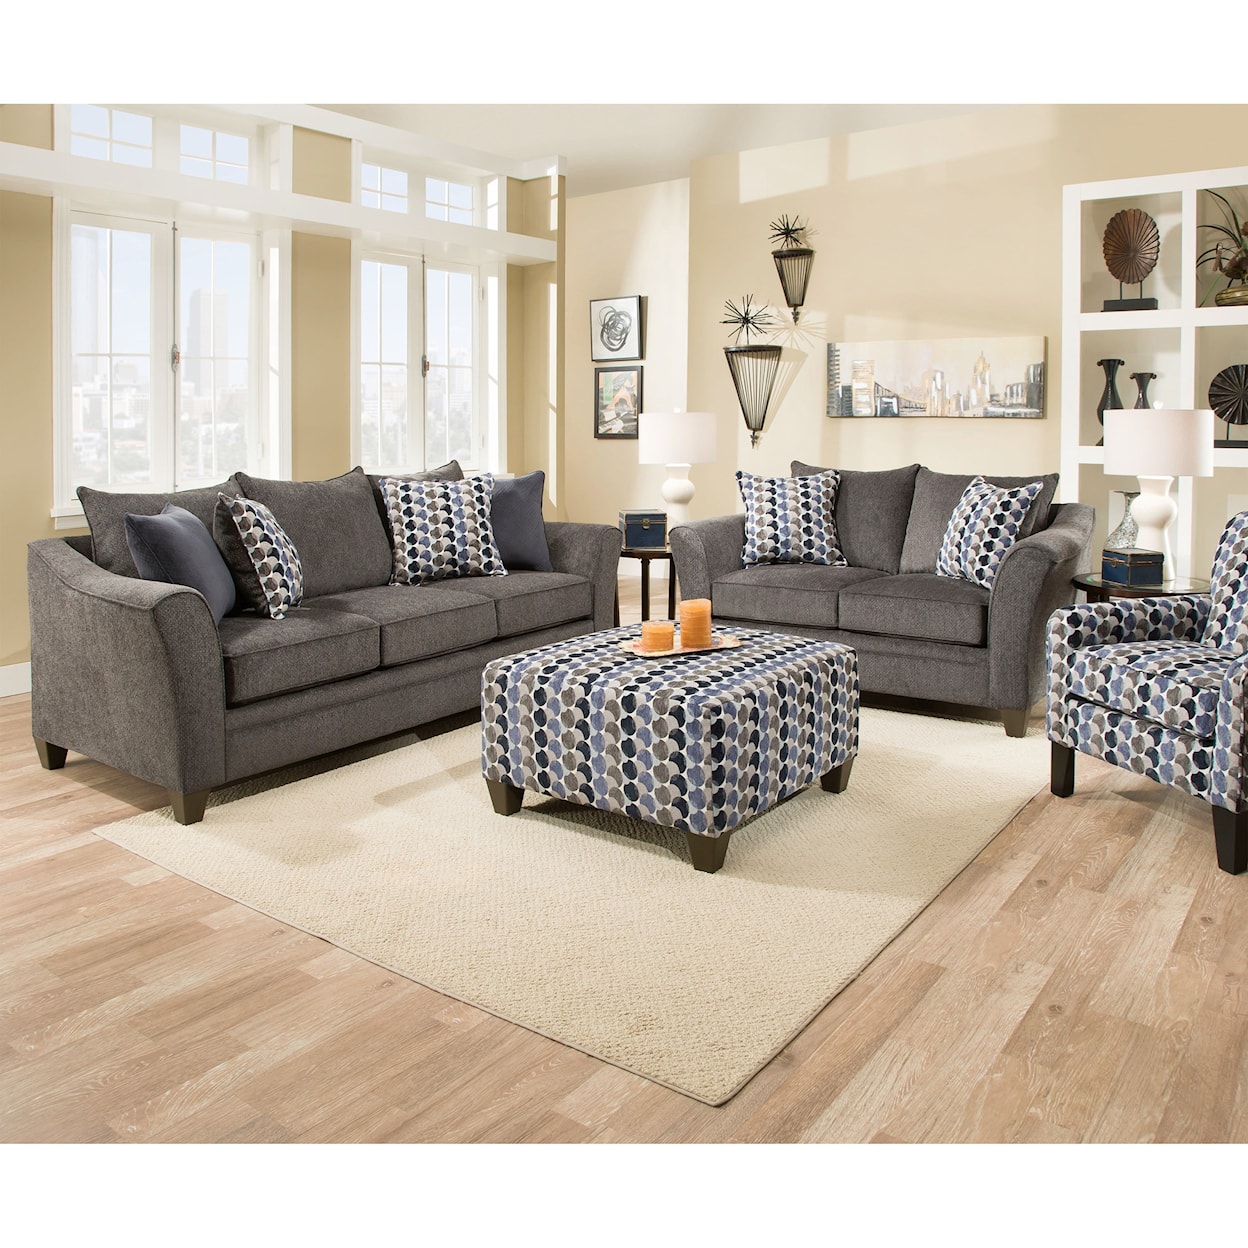 United Furniture Industries 6485 Transitional Loveseat